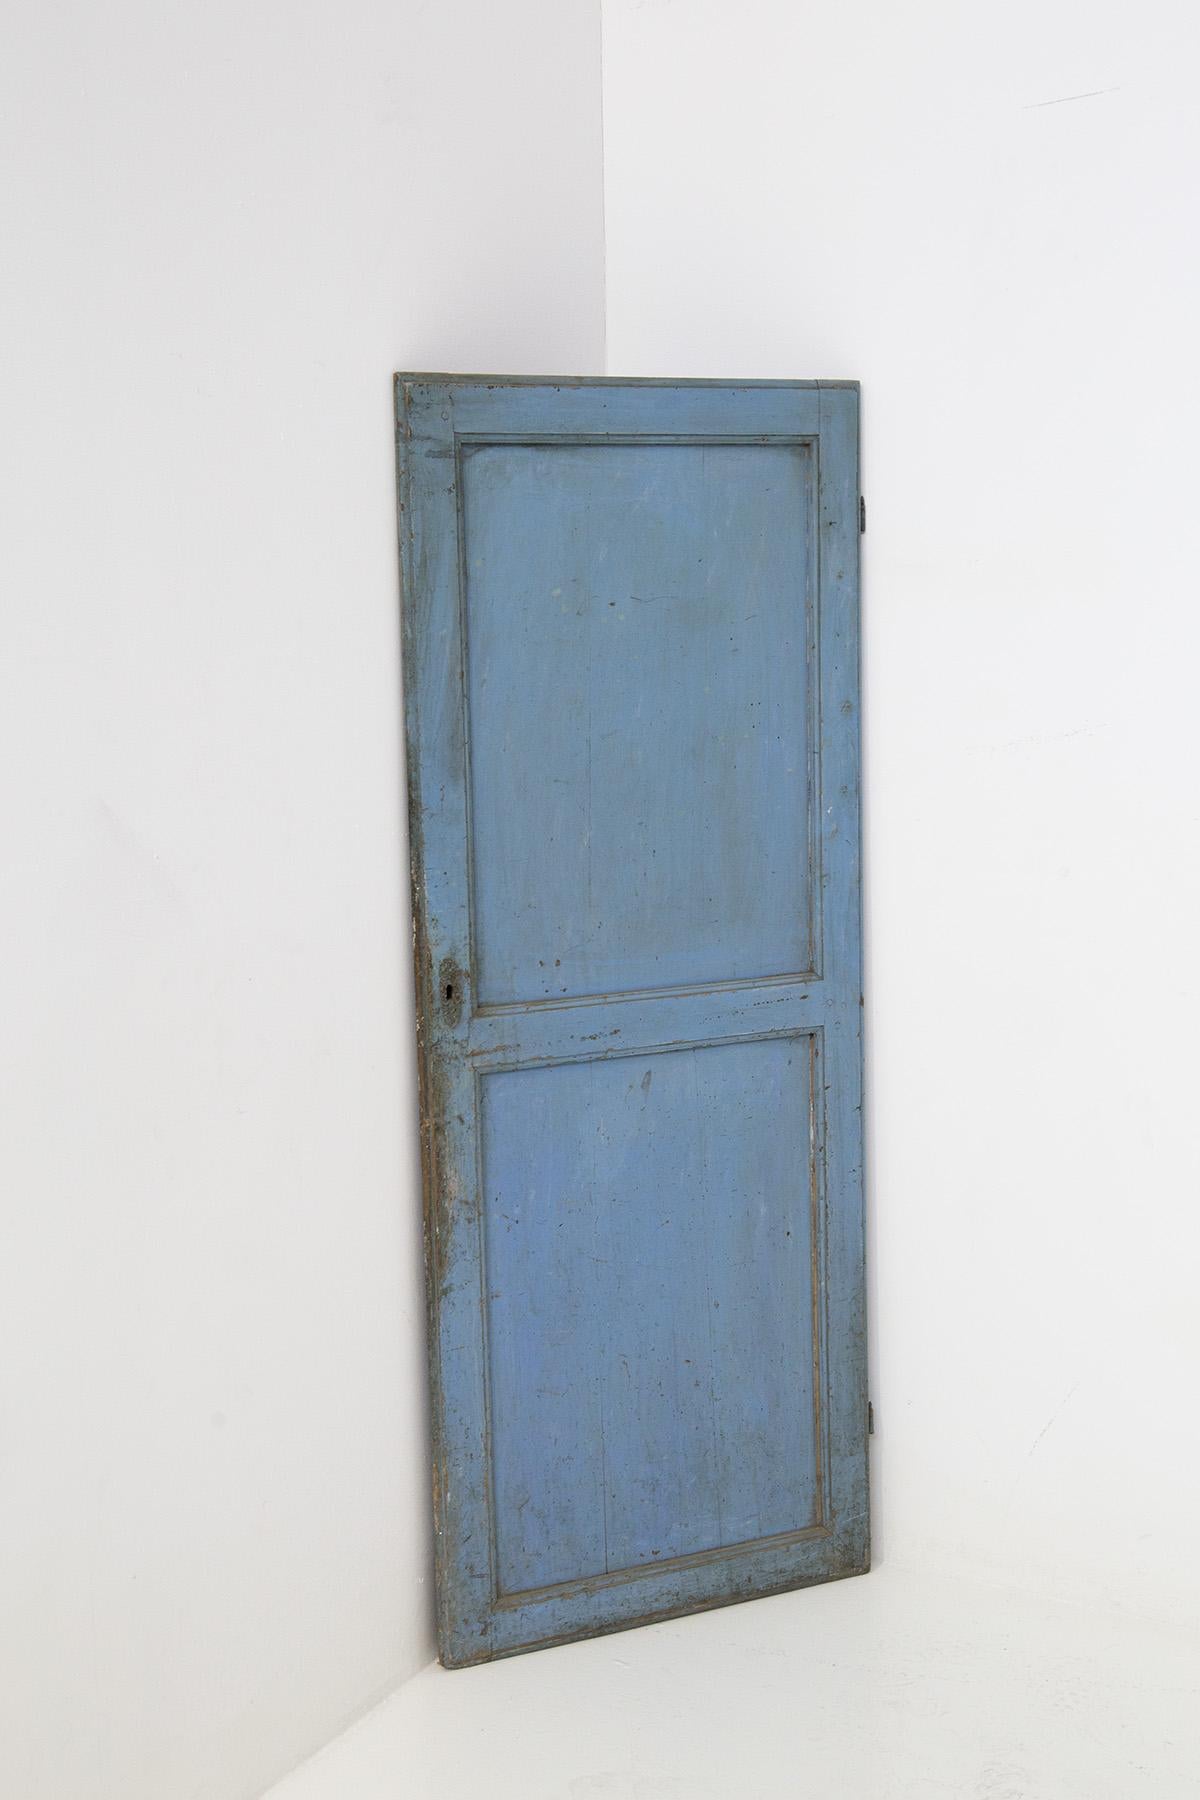 Decorative Italian fané-style door from the early 1920s. The door is made of blue-blue painted wood. The door is obviously antique and through its weathering has created perfect decorative aging. It can be seen that the varnish has peeled off in